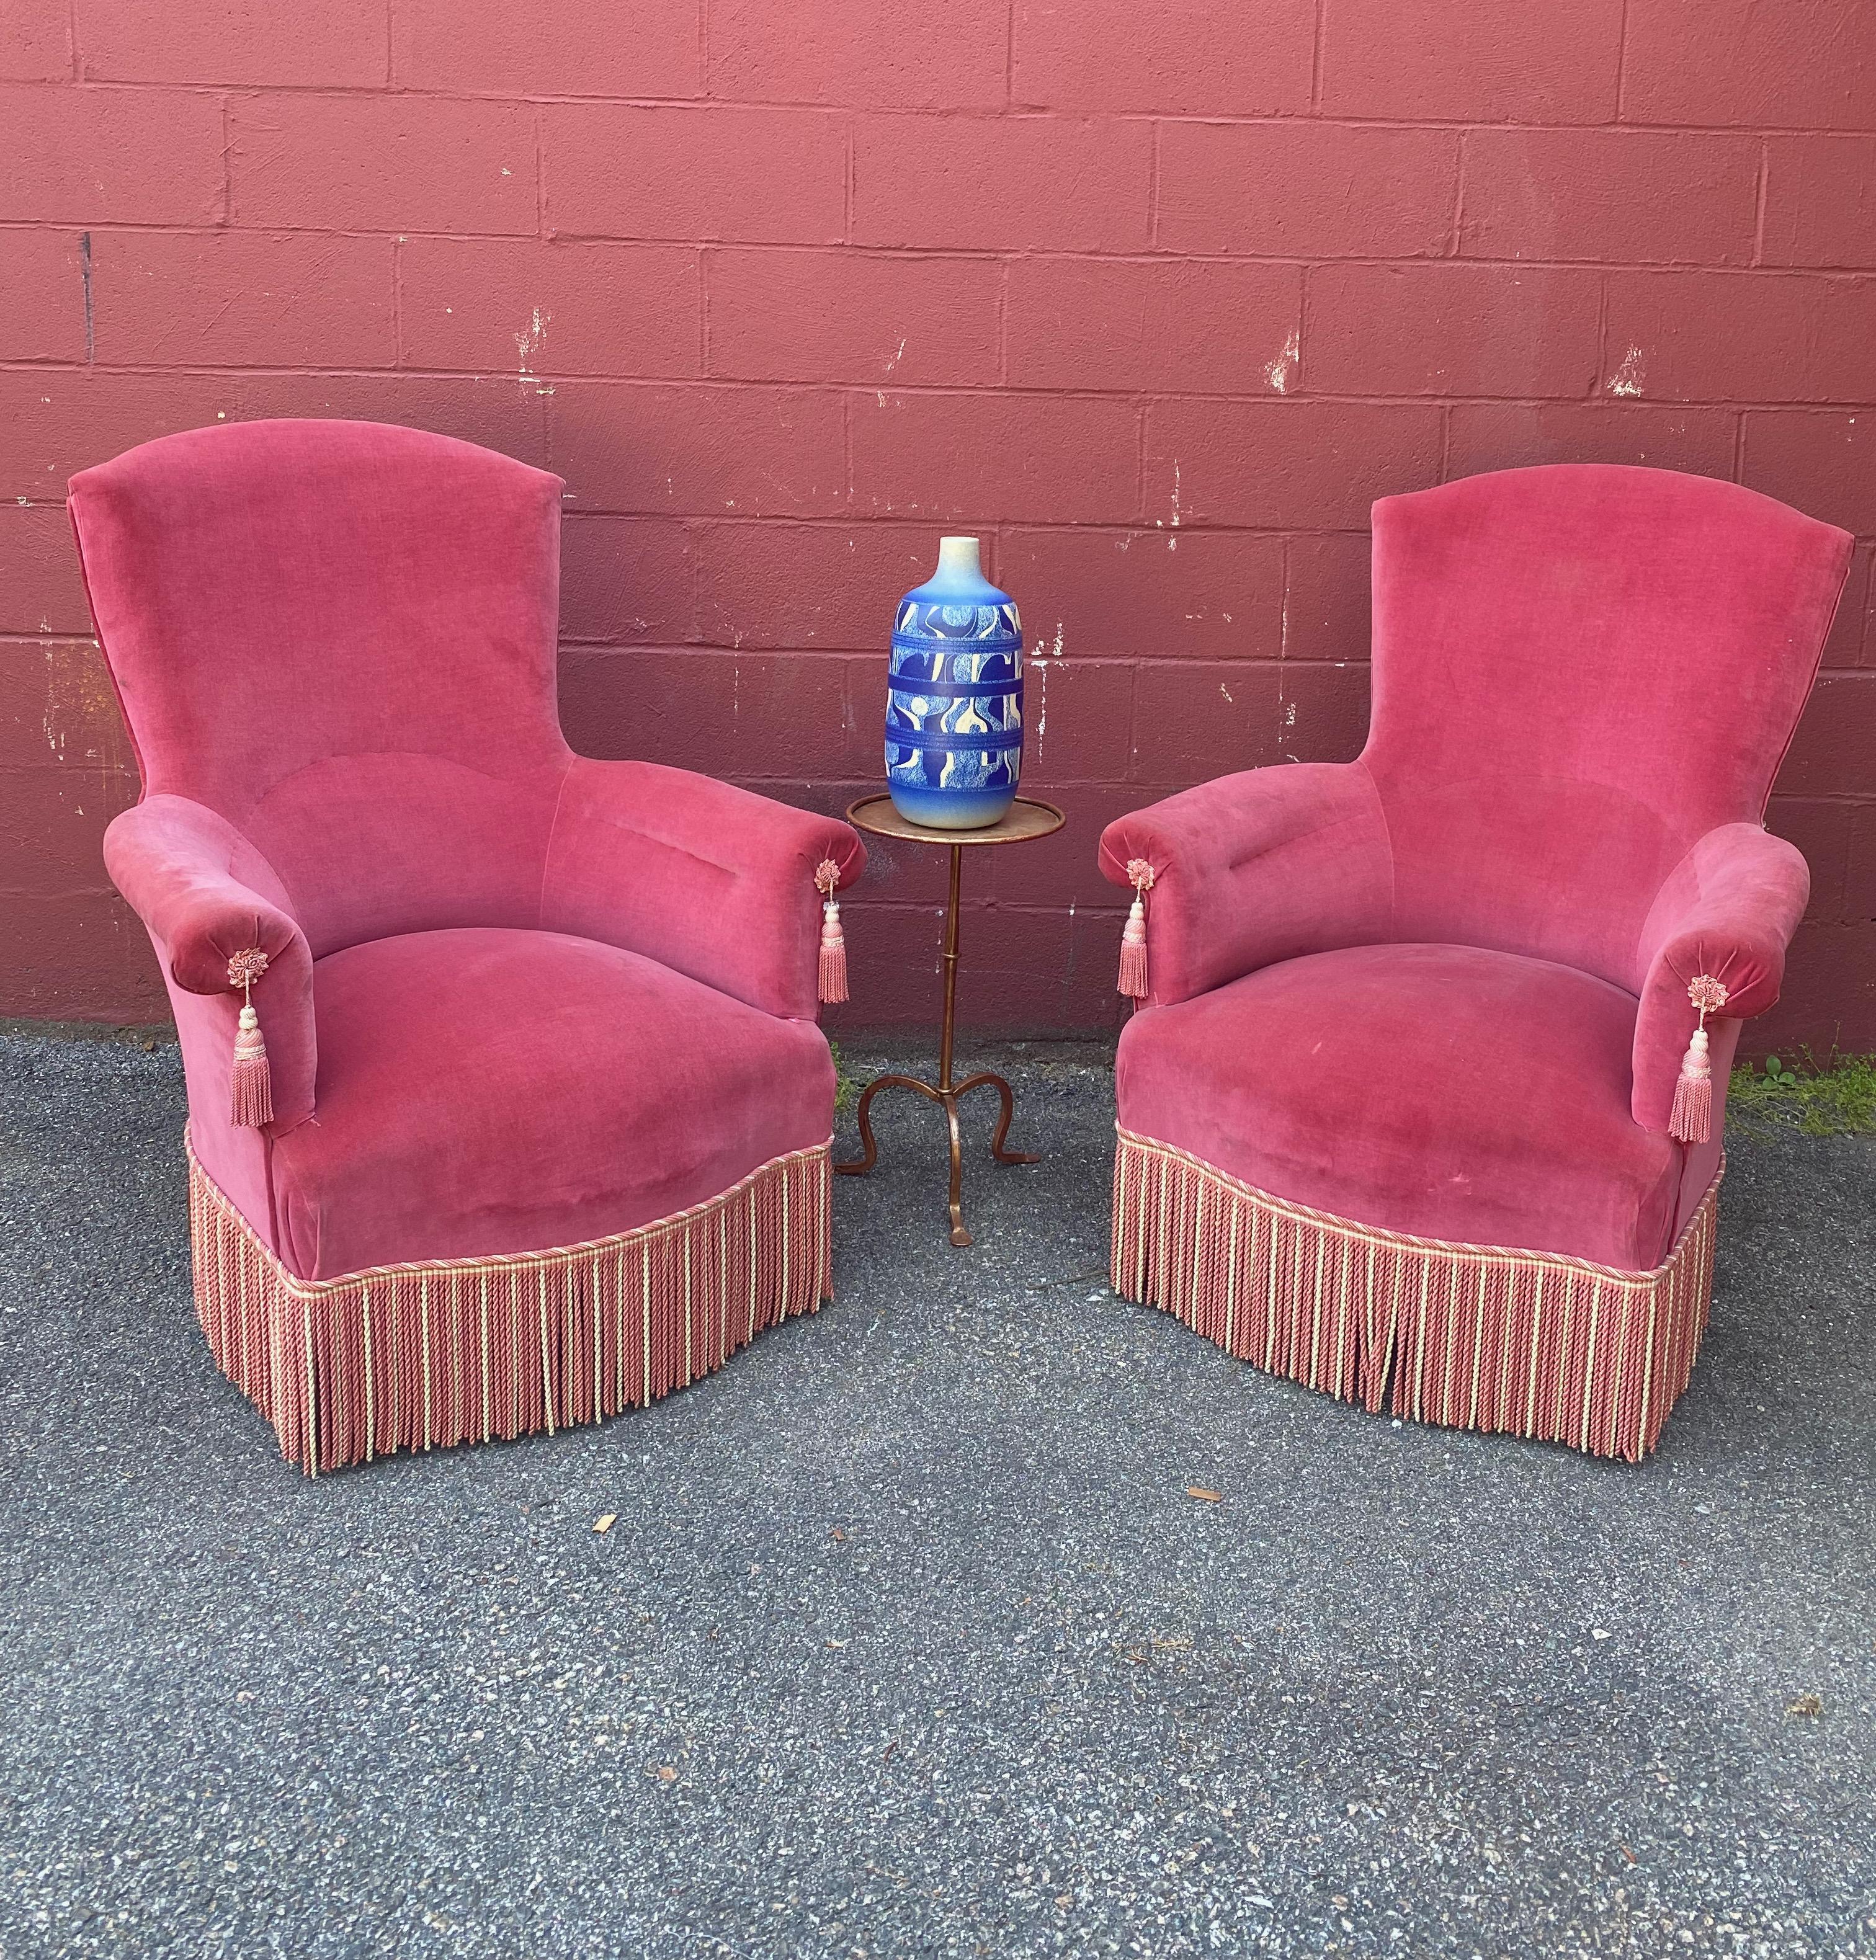 Wonderfully proportioned pair of French Napoleon III armchairs. Upholstered in vintage raspberry colored velvet with contrasting bullion fringe and tassels.

Sold in good vintage condition, as is.